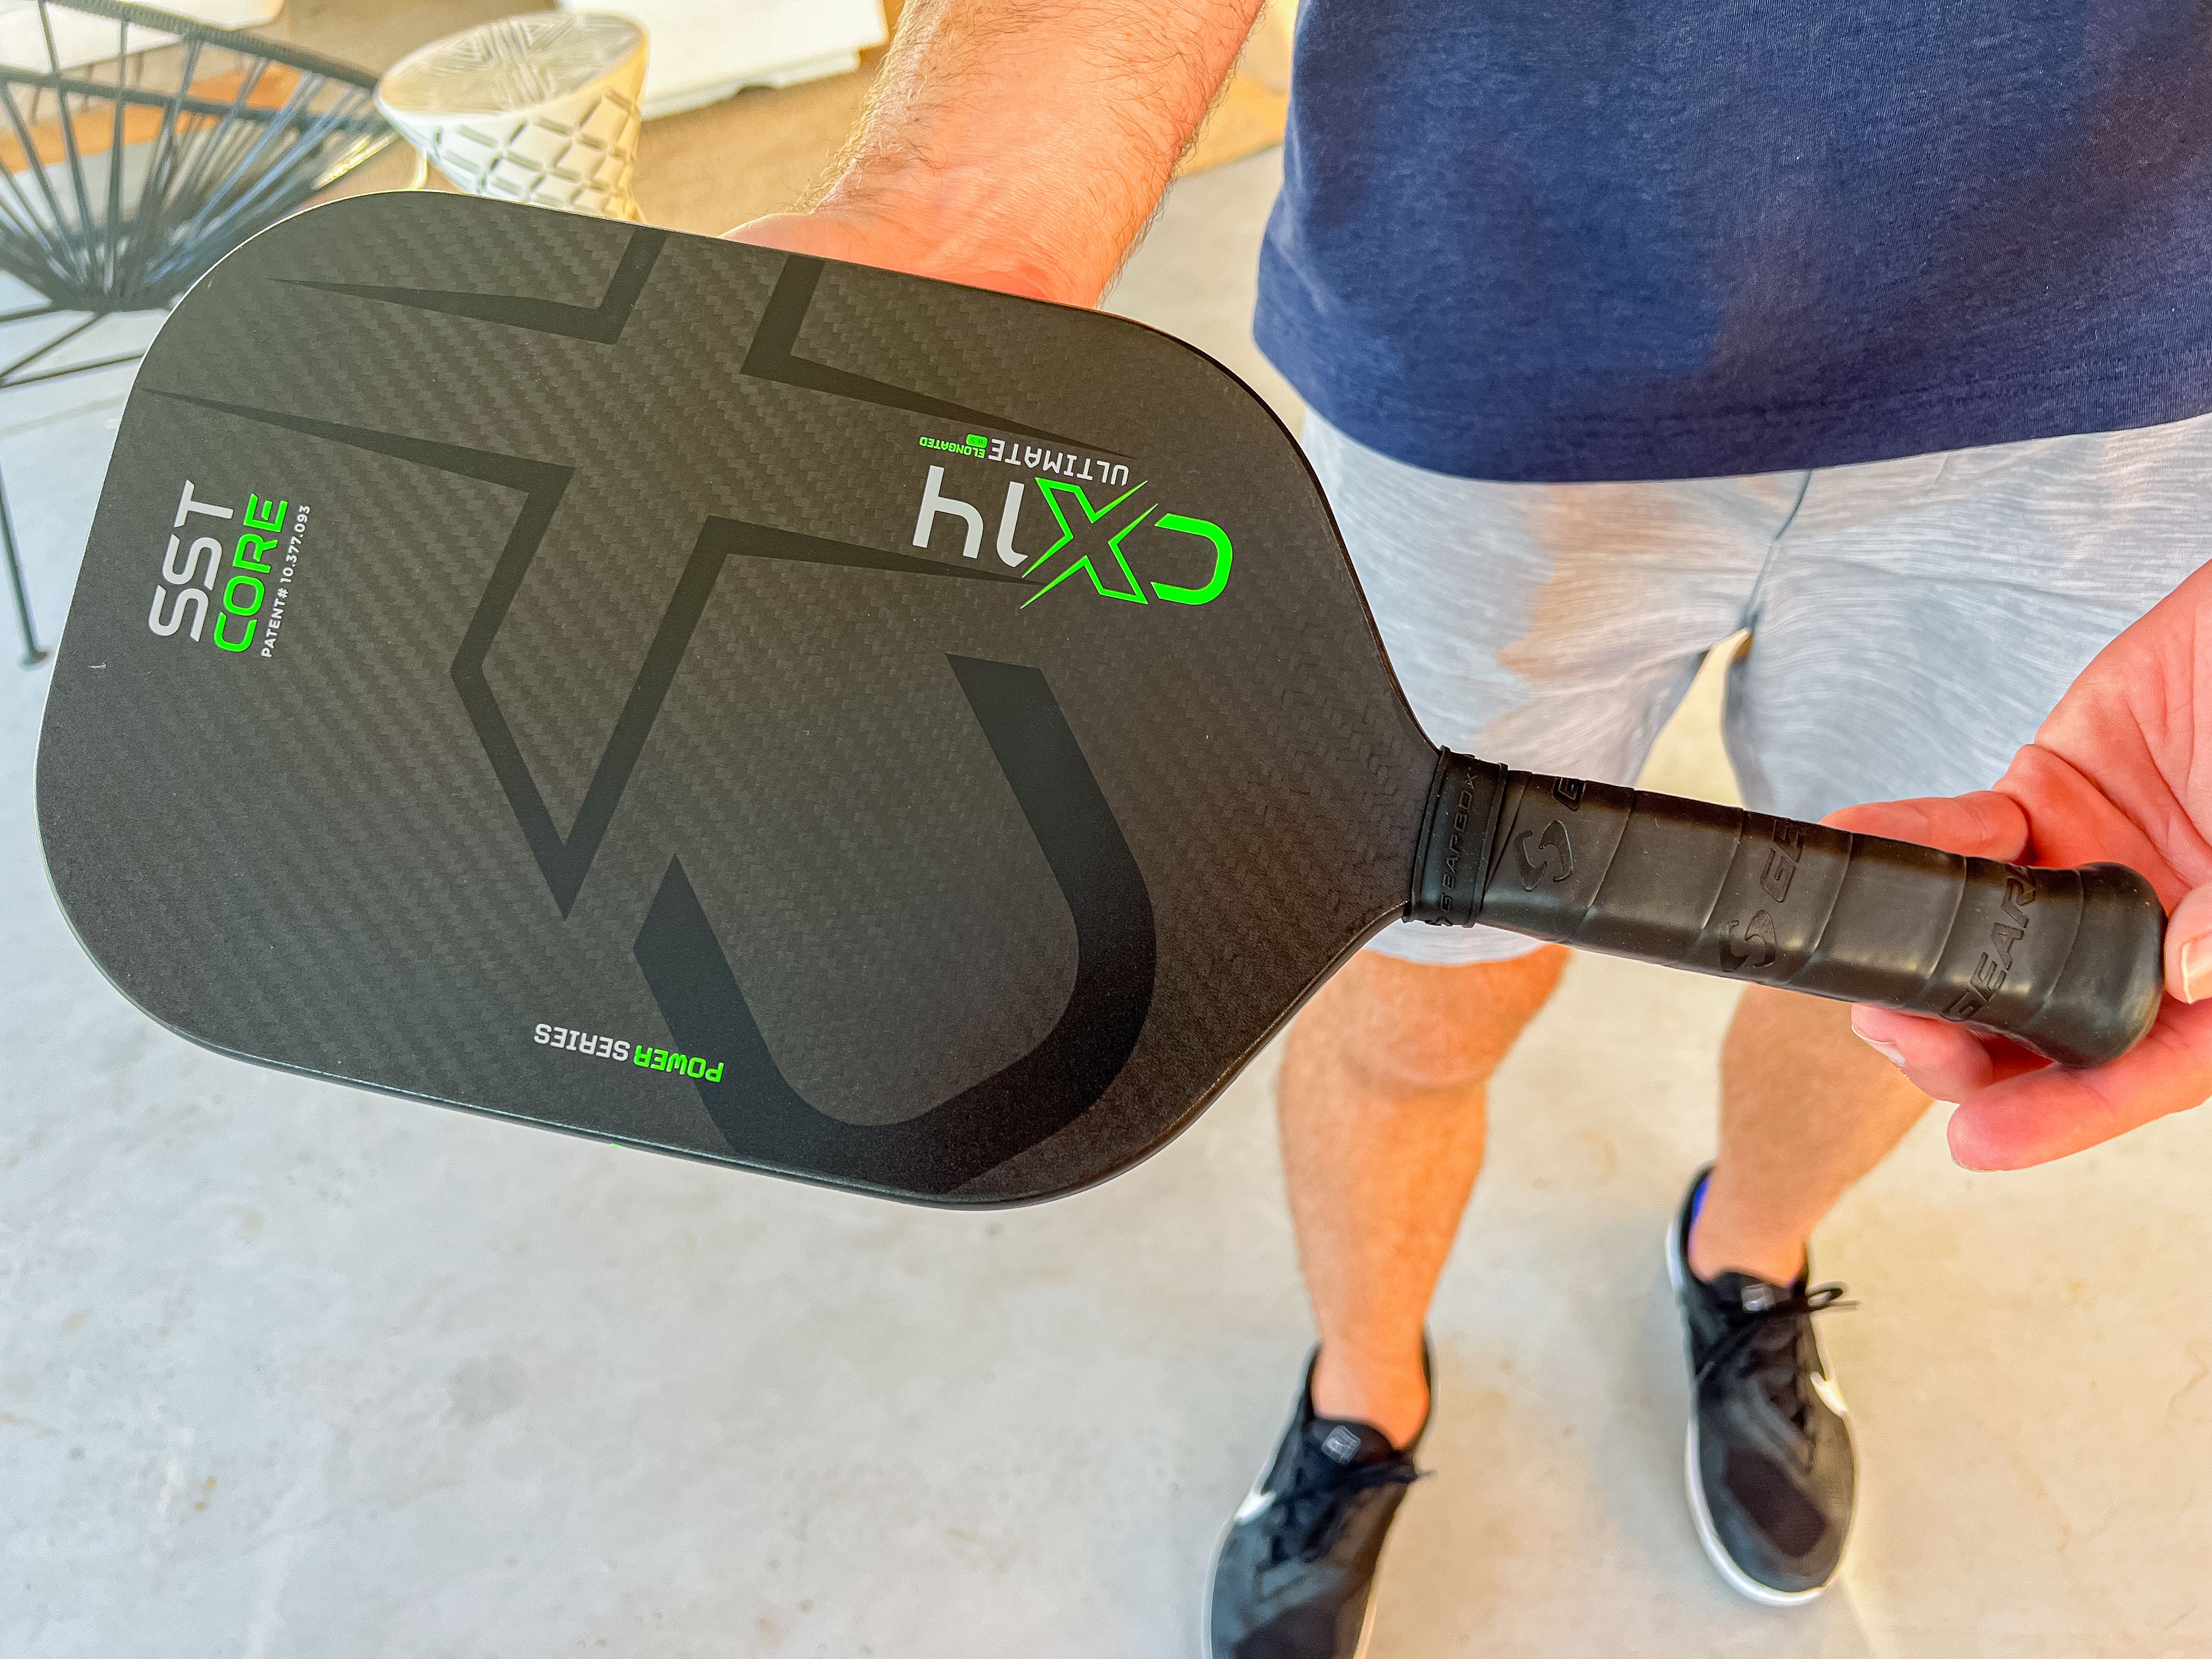 Brandon Mackie showing off the Gearbox CX14E Ultimate Power pickleball paddle